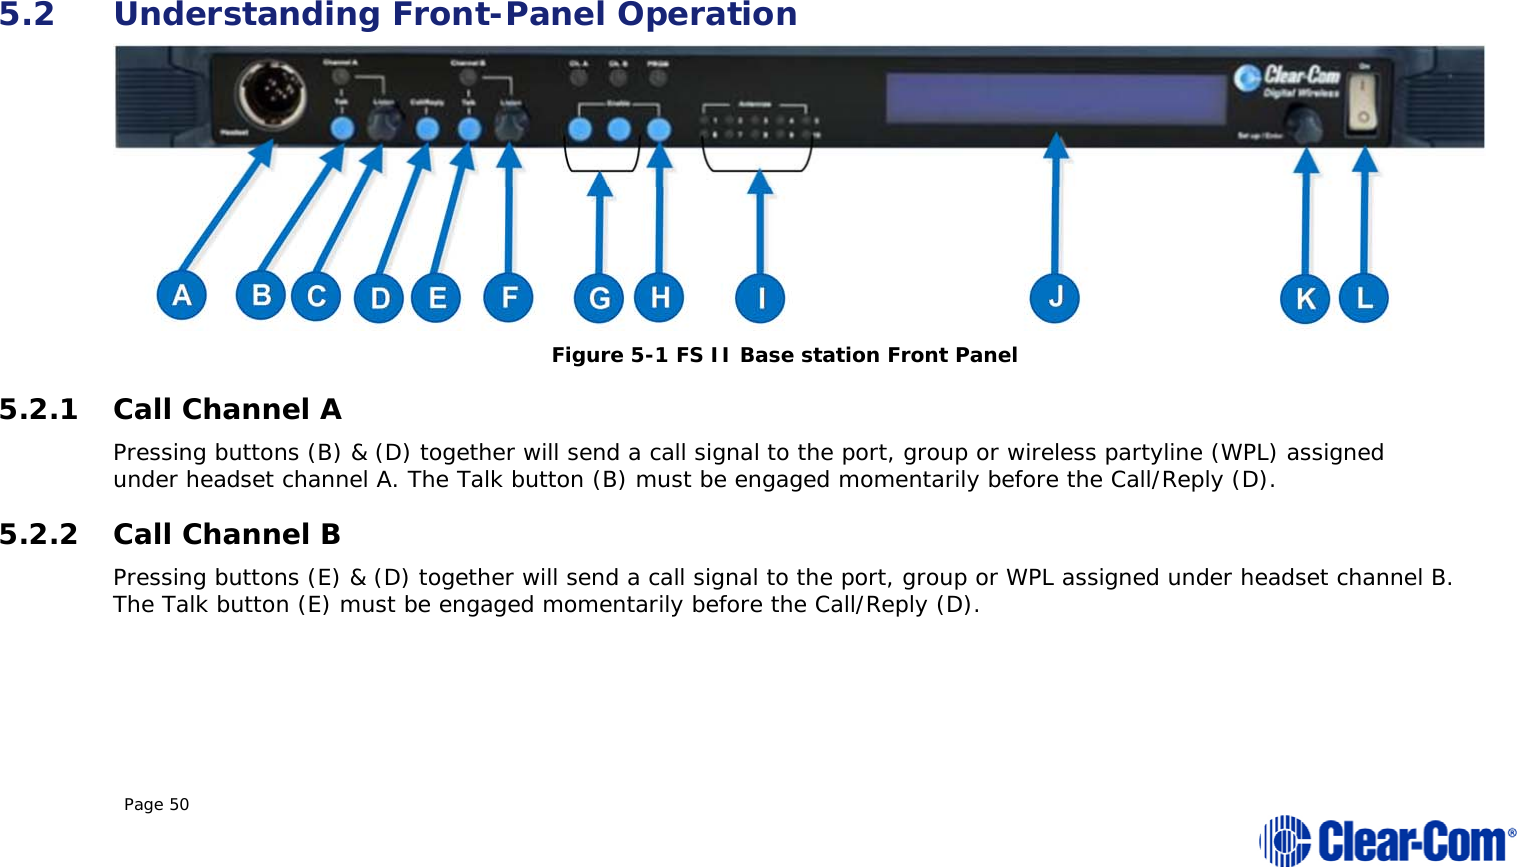  Page 50    5.2 Understanding Front-Panel Operation  Figure 5-1 FS II Base station Front Panel 5.2.1 Call Channel A Pressing buttons (B) &amp; (D) together will send a call signal to the port, group or wireless partyline (WPL) assigned under headset channel A. The Talk button (B) must be engaged momentarily before the Call/Reply (D).  5.2.2 Call Channel B Pressing buttons (E) &amp; (D) together will send a call signal to the port, group or WPL assigned under headset channel B. The Talk button (E) must be engaged momentarily before the Call/Reply (D).